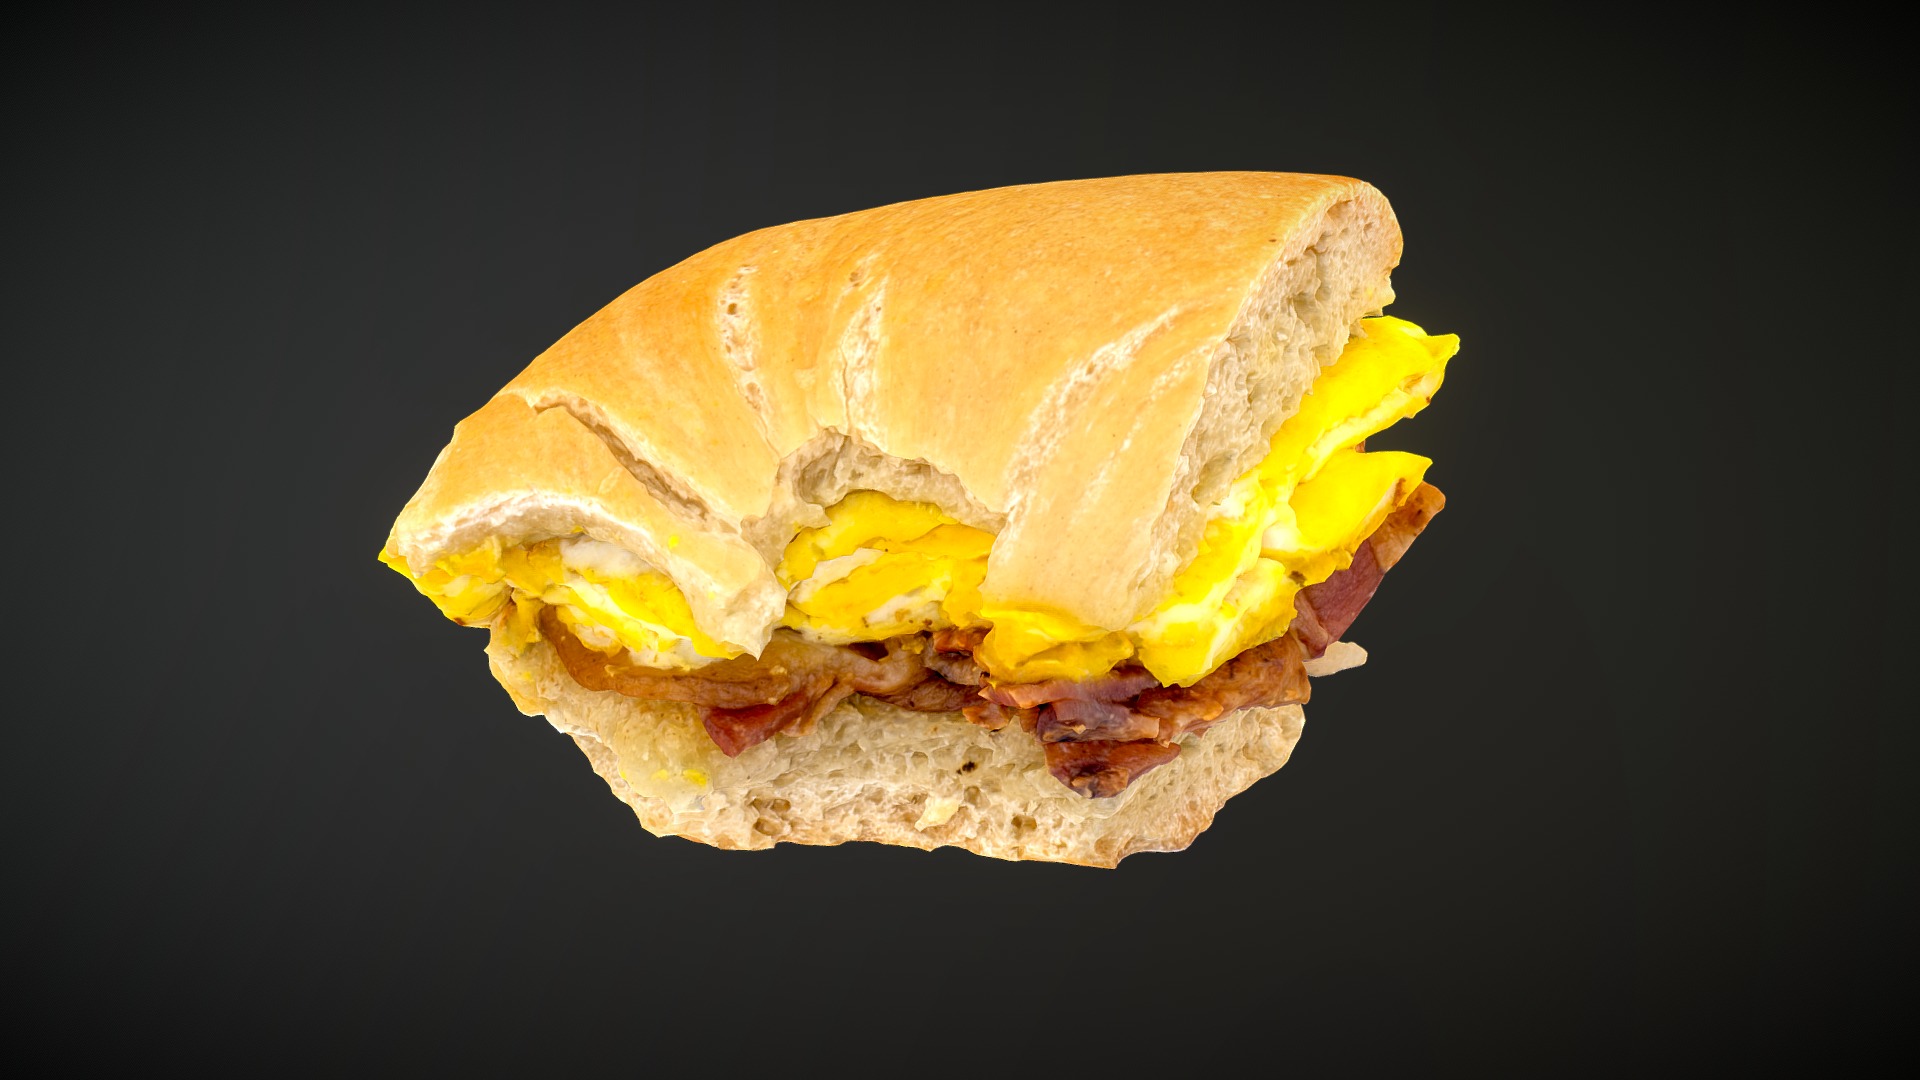 3D model Mostly eaten bagel with egg and bacon - This is a 3D model of the Mostly eaten bagel with egg and bacon. The 3D model is about a cheeseburger on a black background.